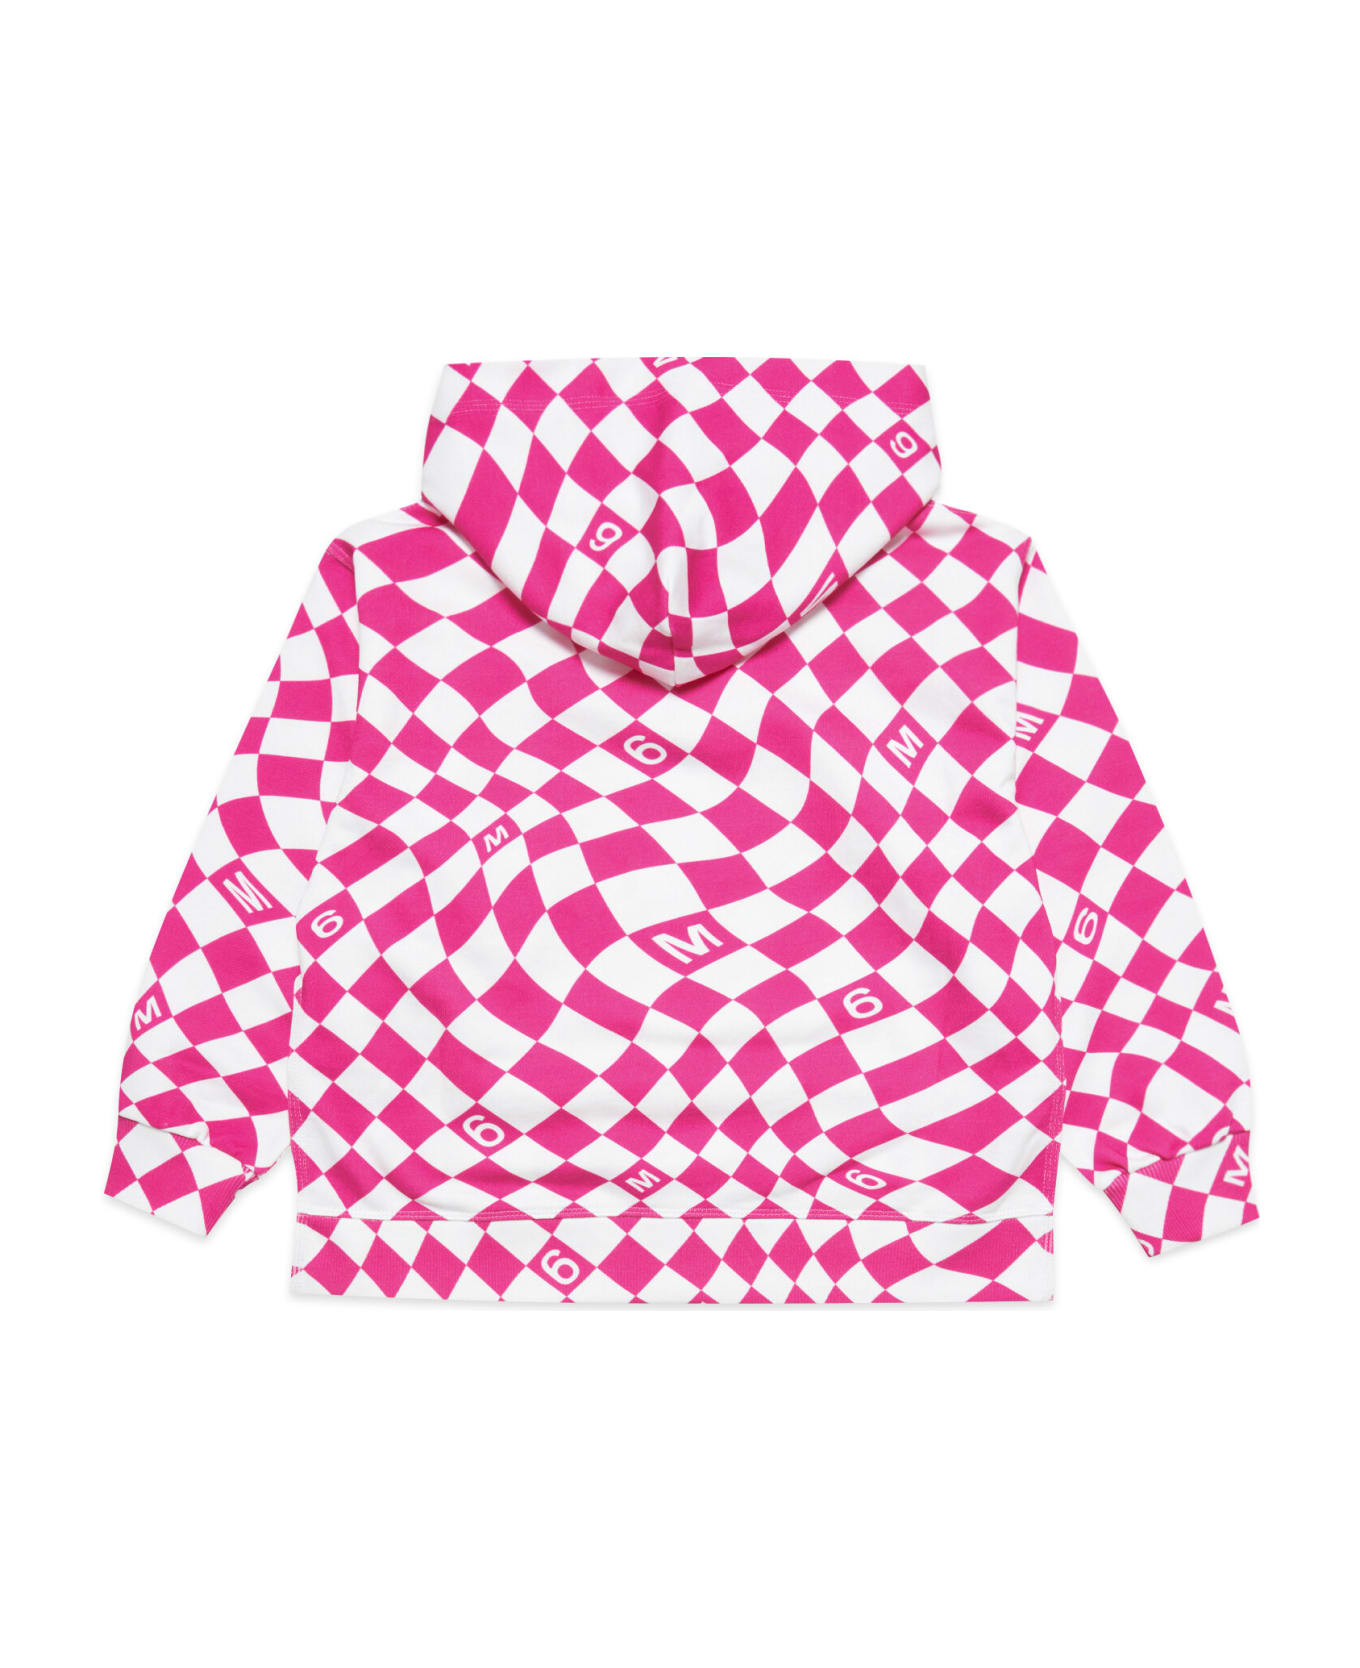 MM6 Maison Margiela Mm6s52u Sweat-shirt Maison Margiela White And Pink Cotton Hoodie With Chequered Pattern - White/super pink